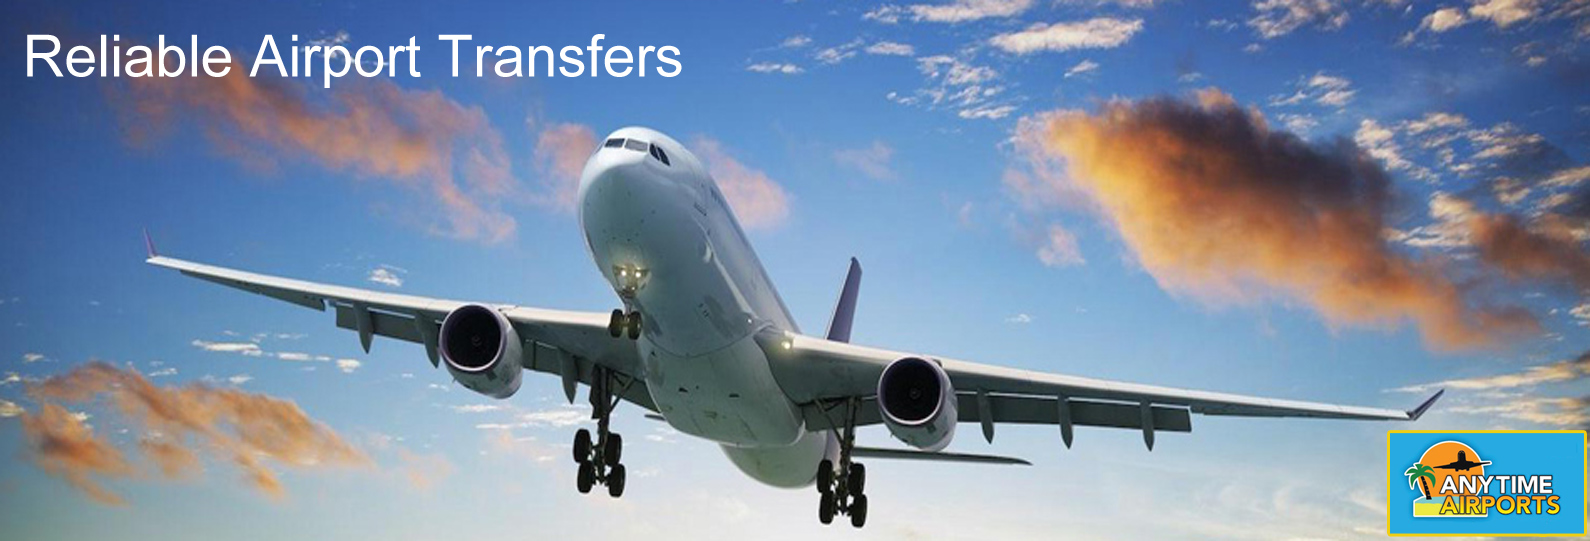 check our airport transfer prices